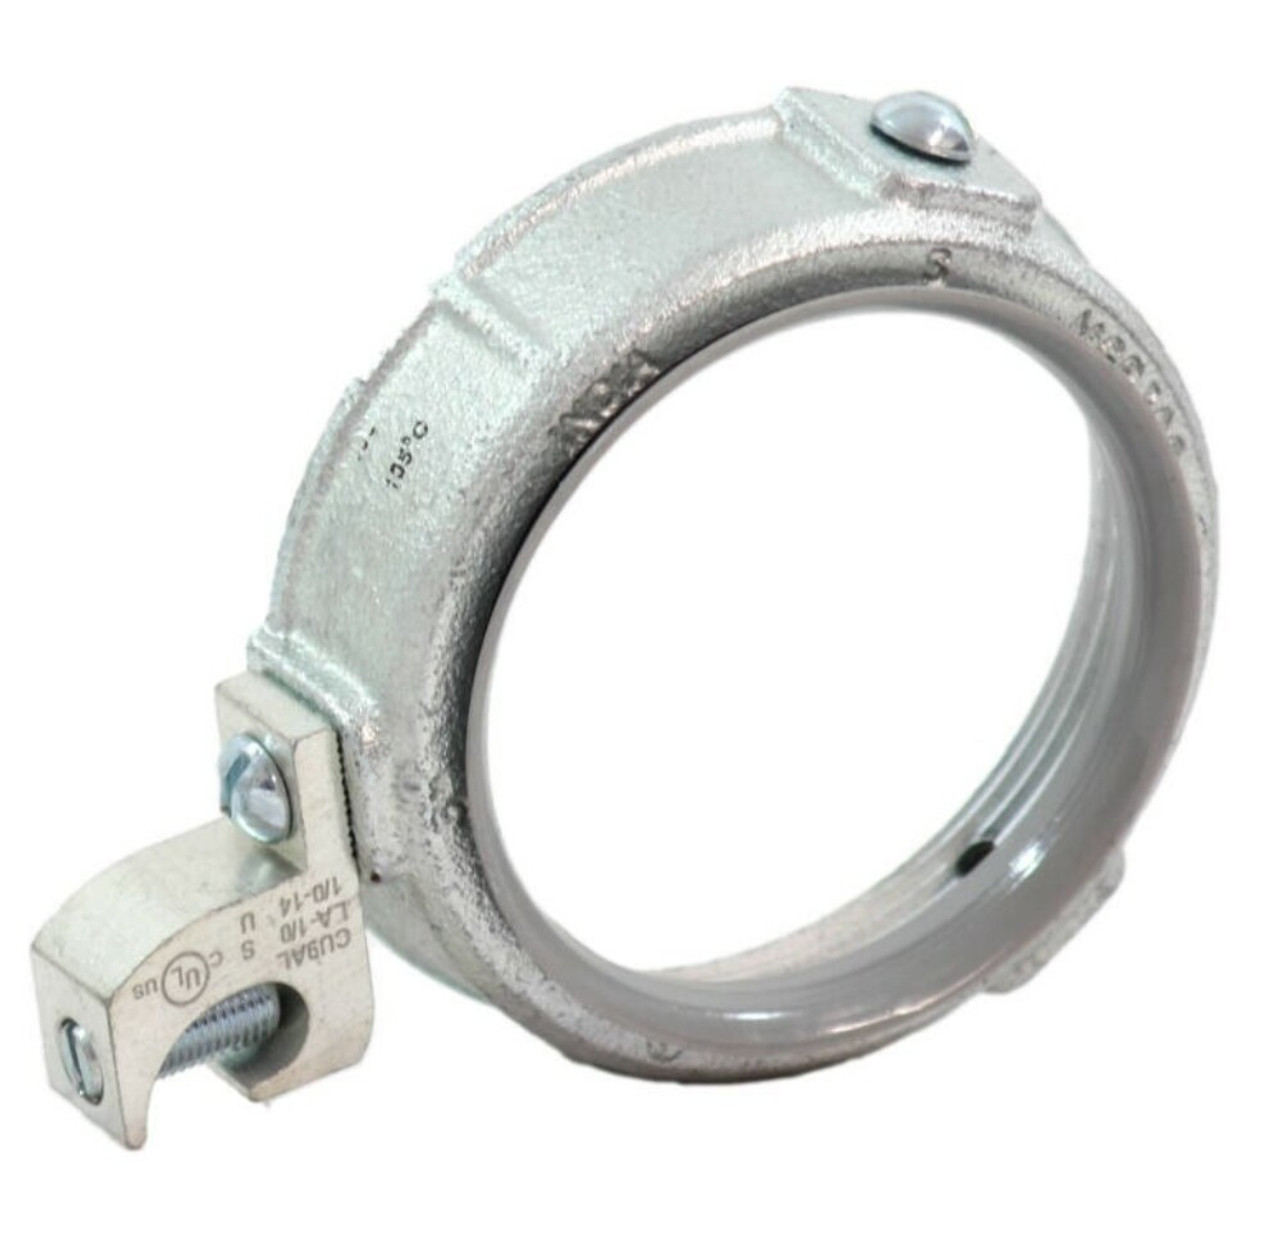 Bridgeport MGB300 Conduit Bushing Material: Malleable Iron Size: 3 Inch Grounding